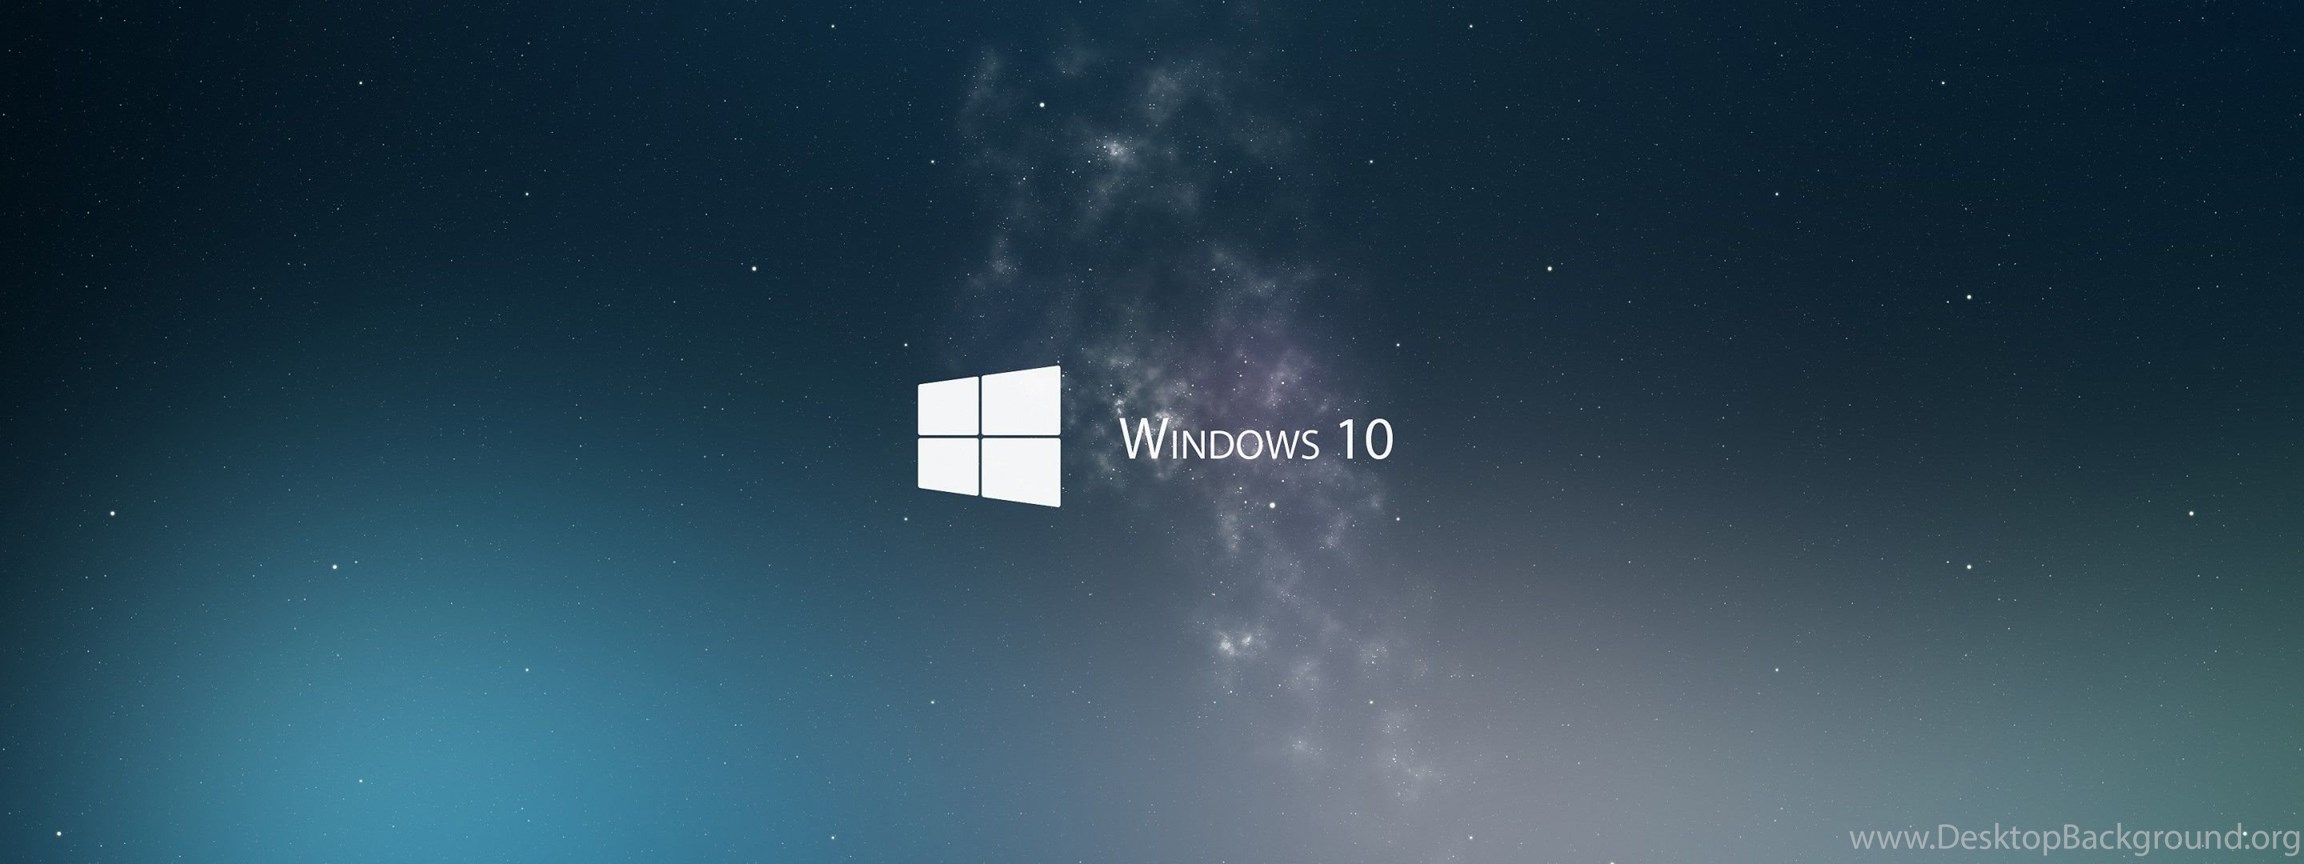 Download Windows 10 Hd Wallpapers For 2880 X 1800